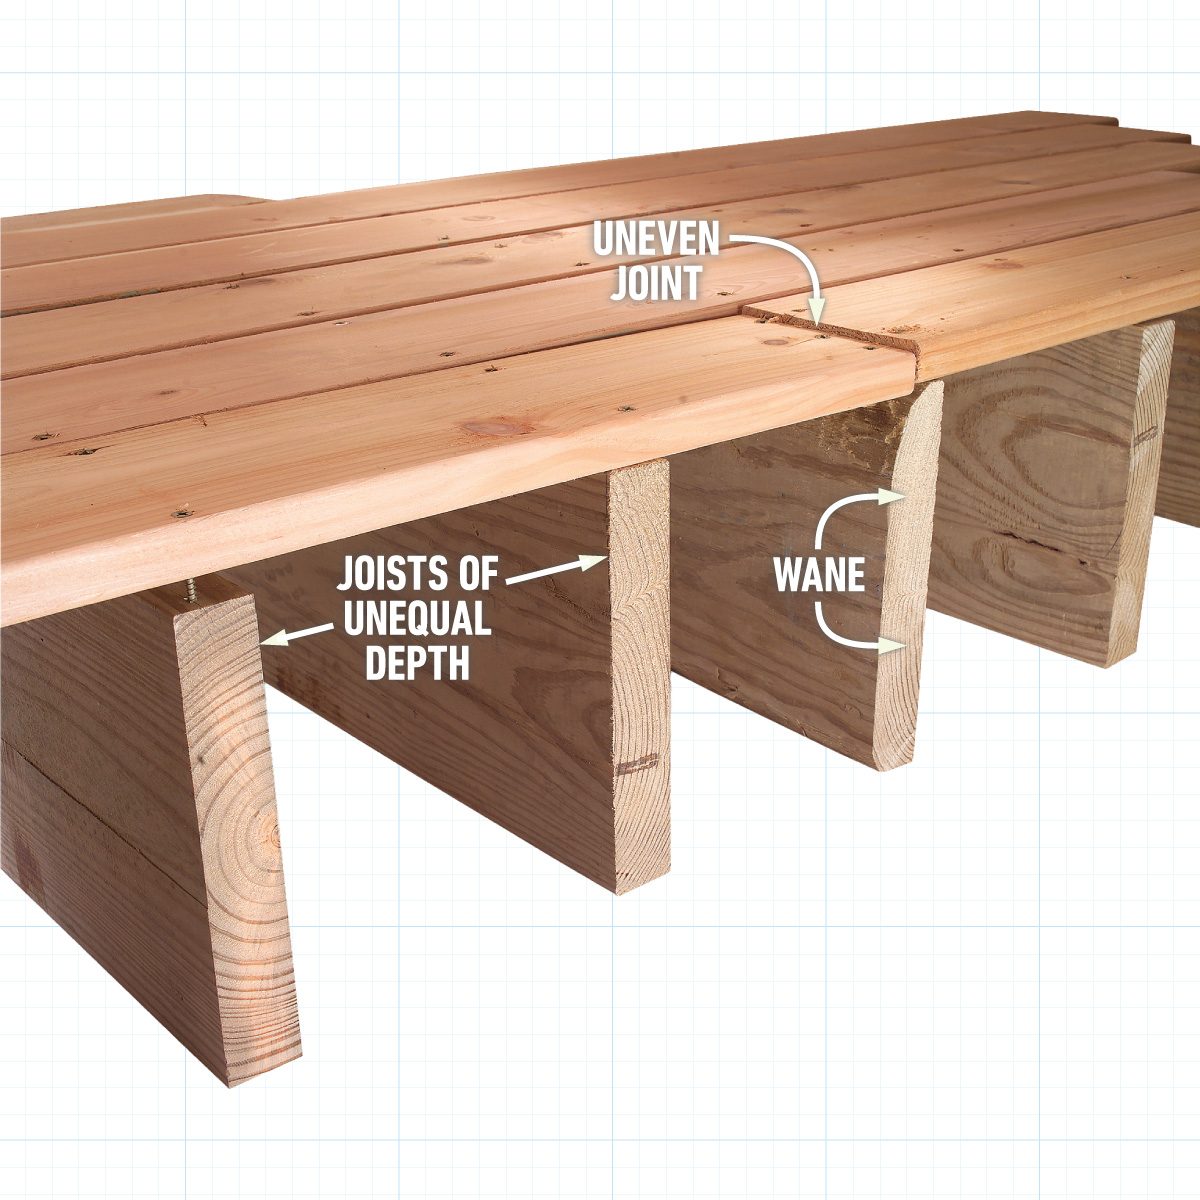 Tips For Choosing And Buying Deck Lumber Avoid "Scalped Edges" and Uneven Widths